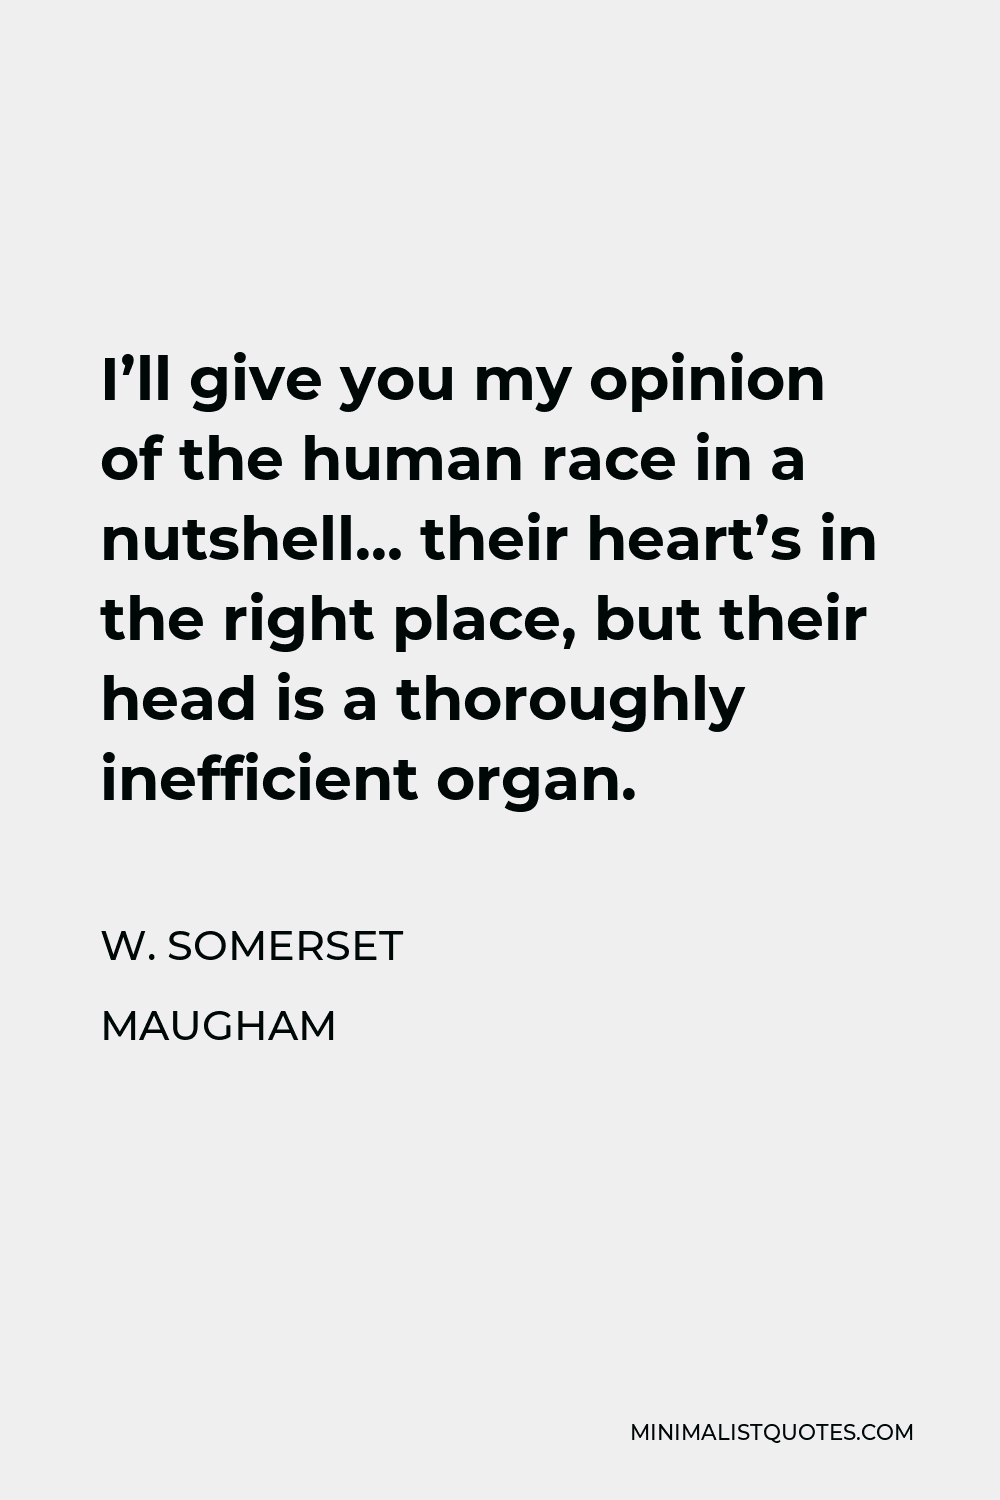 W. Somerset Maugham Quote - I’ll give you my opinion of the human race in a nutshell… their heart’s in the right place, but their head is a thoroughly inefficient organ.